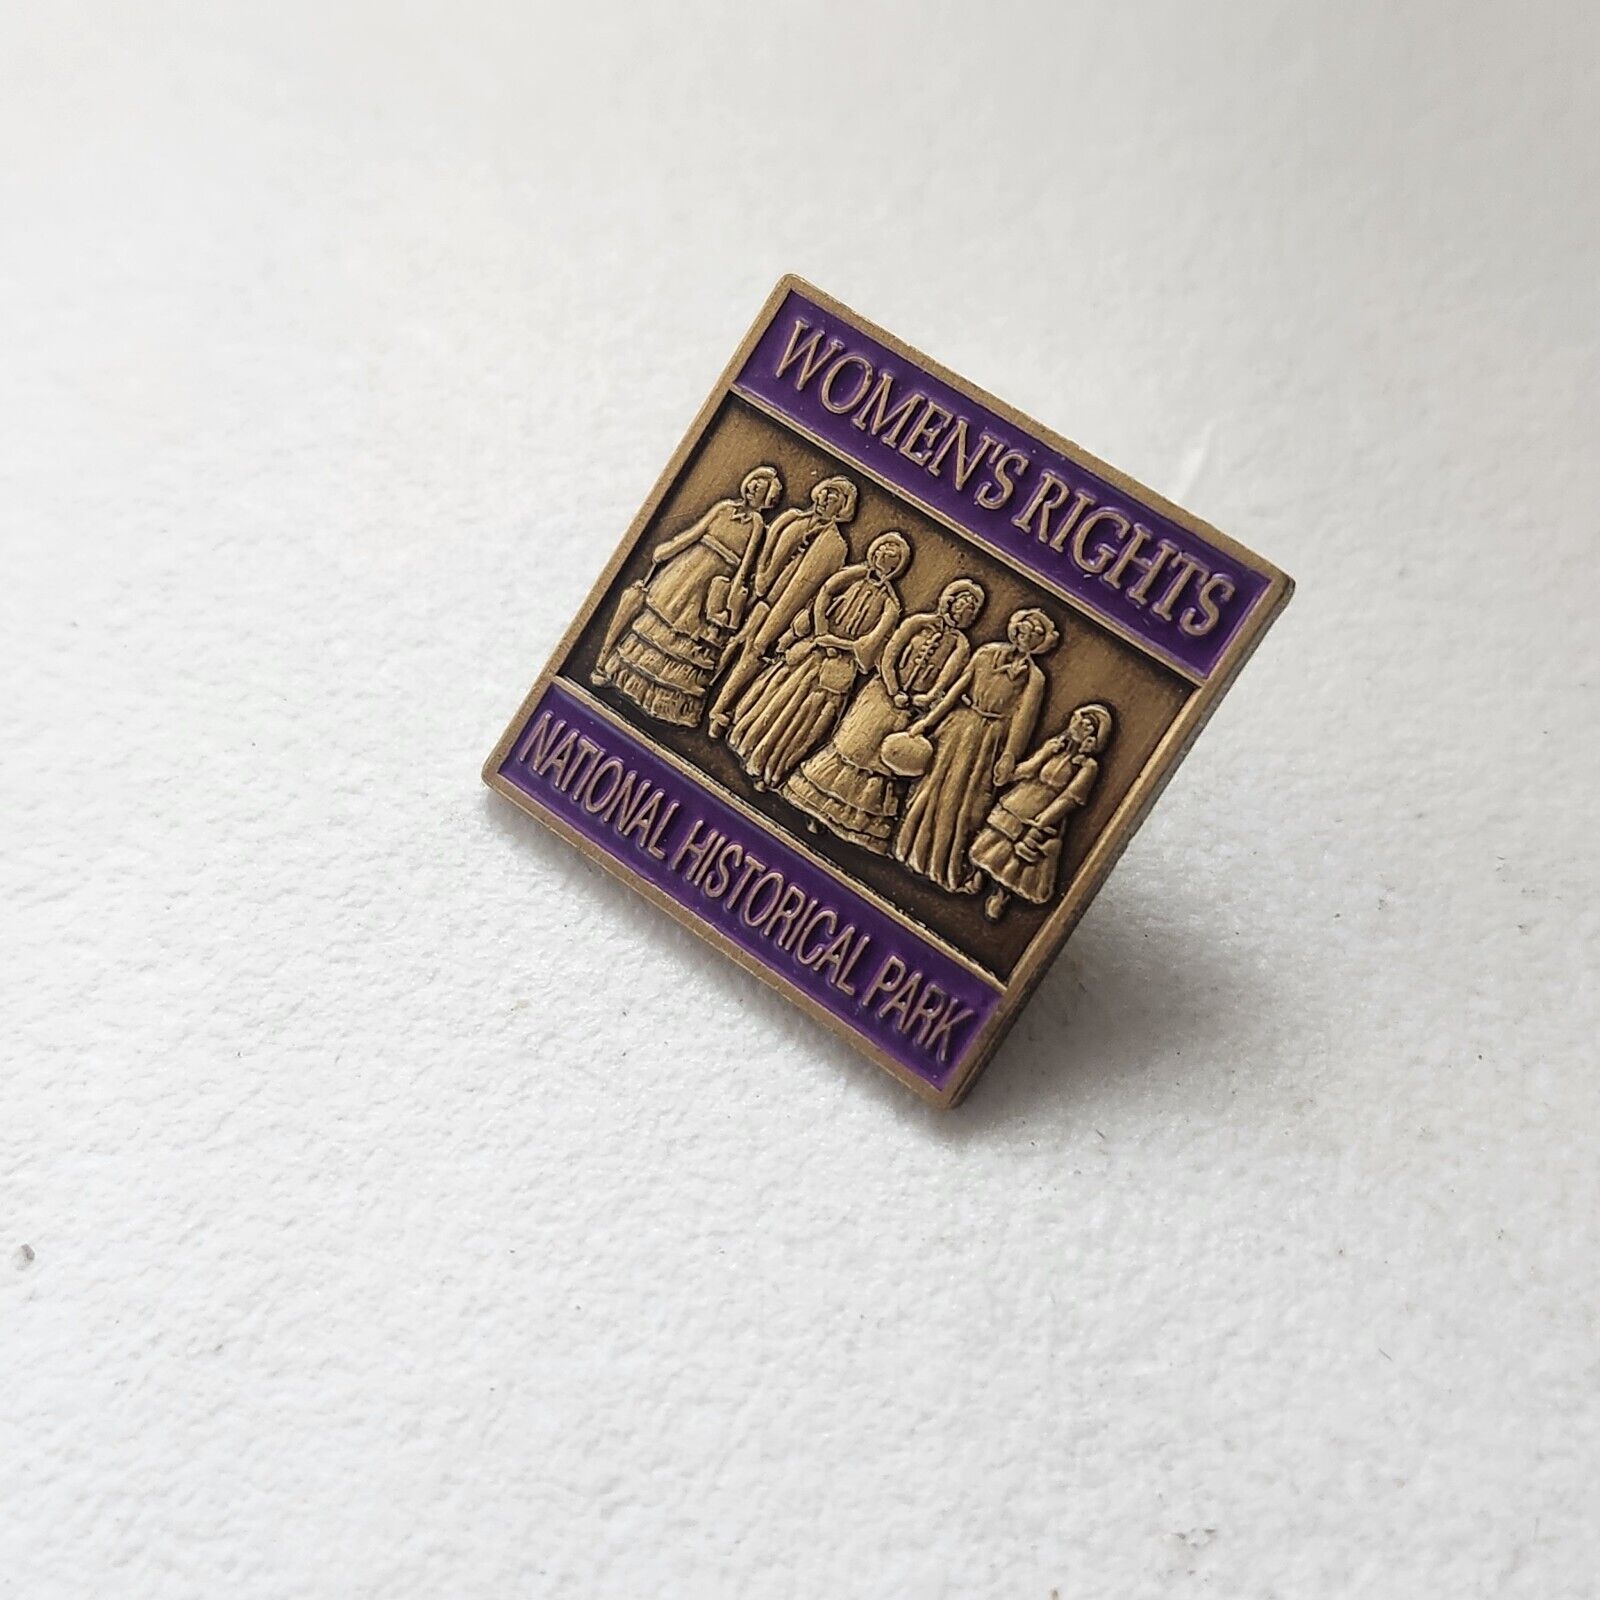 Vintage Women’s Rights National Historical Park Travel Lapel Pin